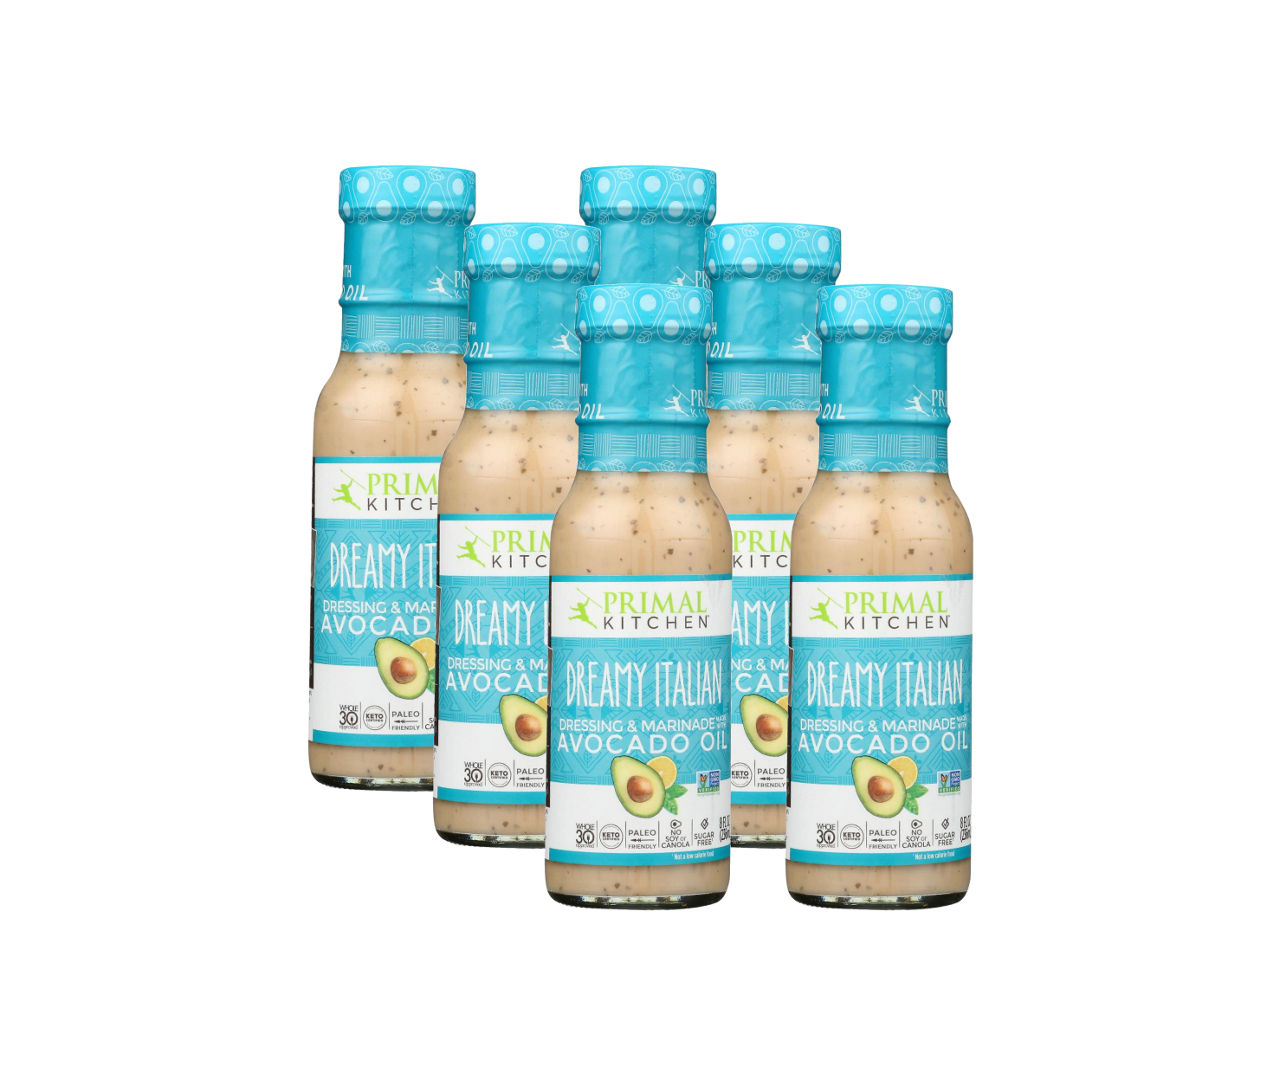 Primal Kitchen Ranch Dressing, Pack of 6